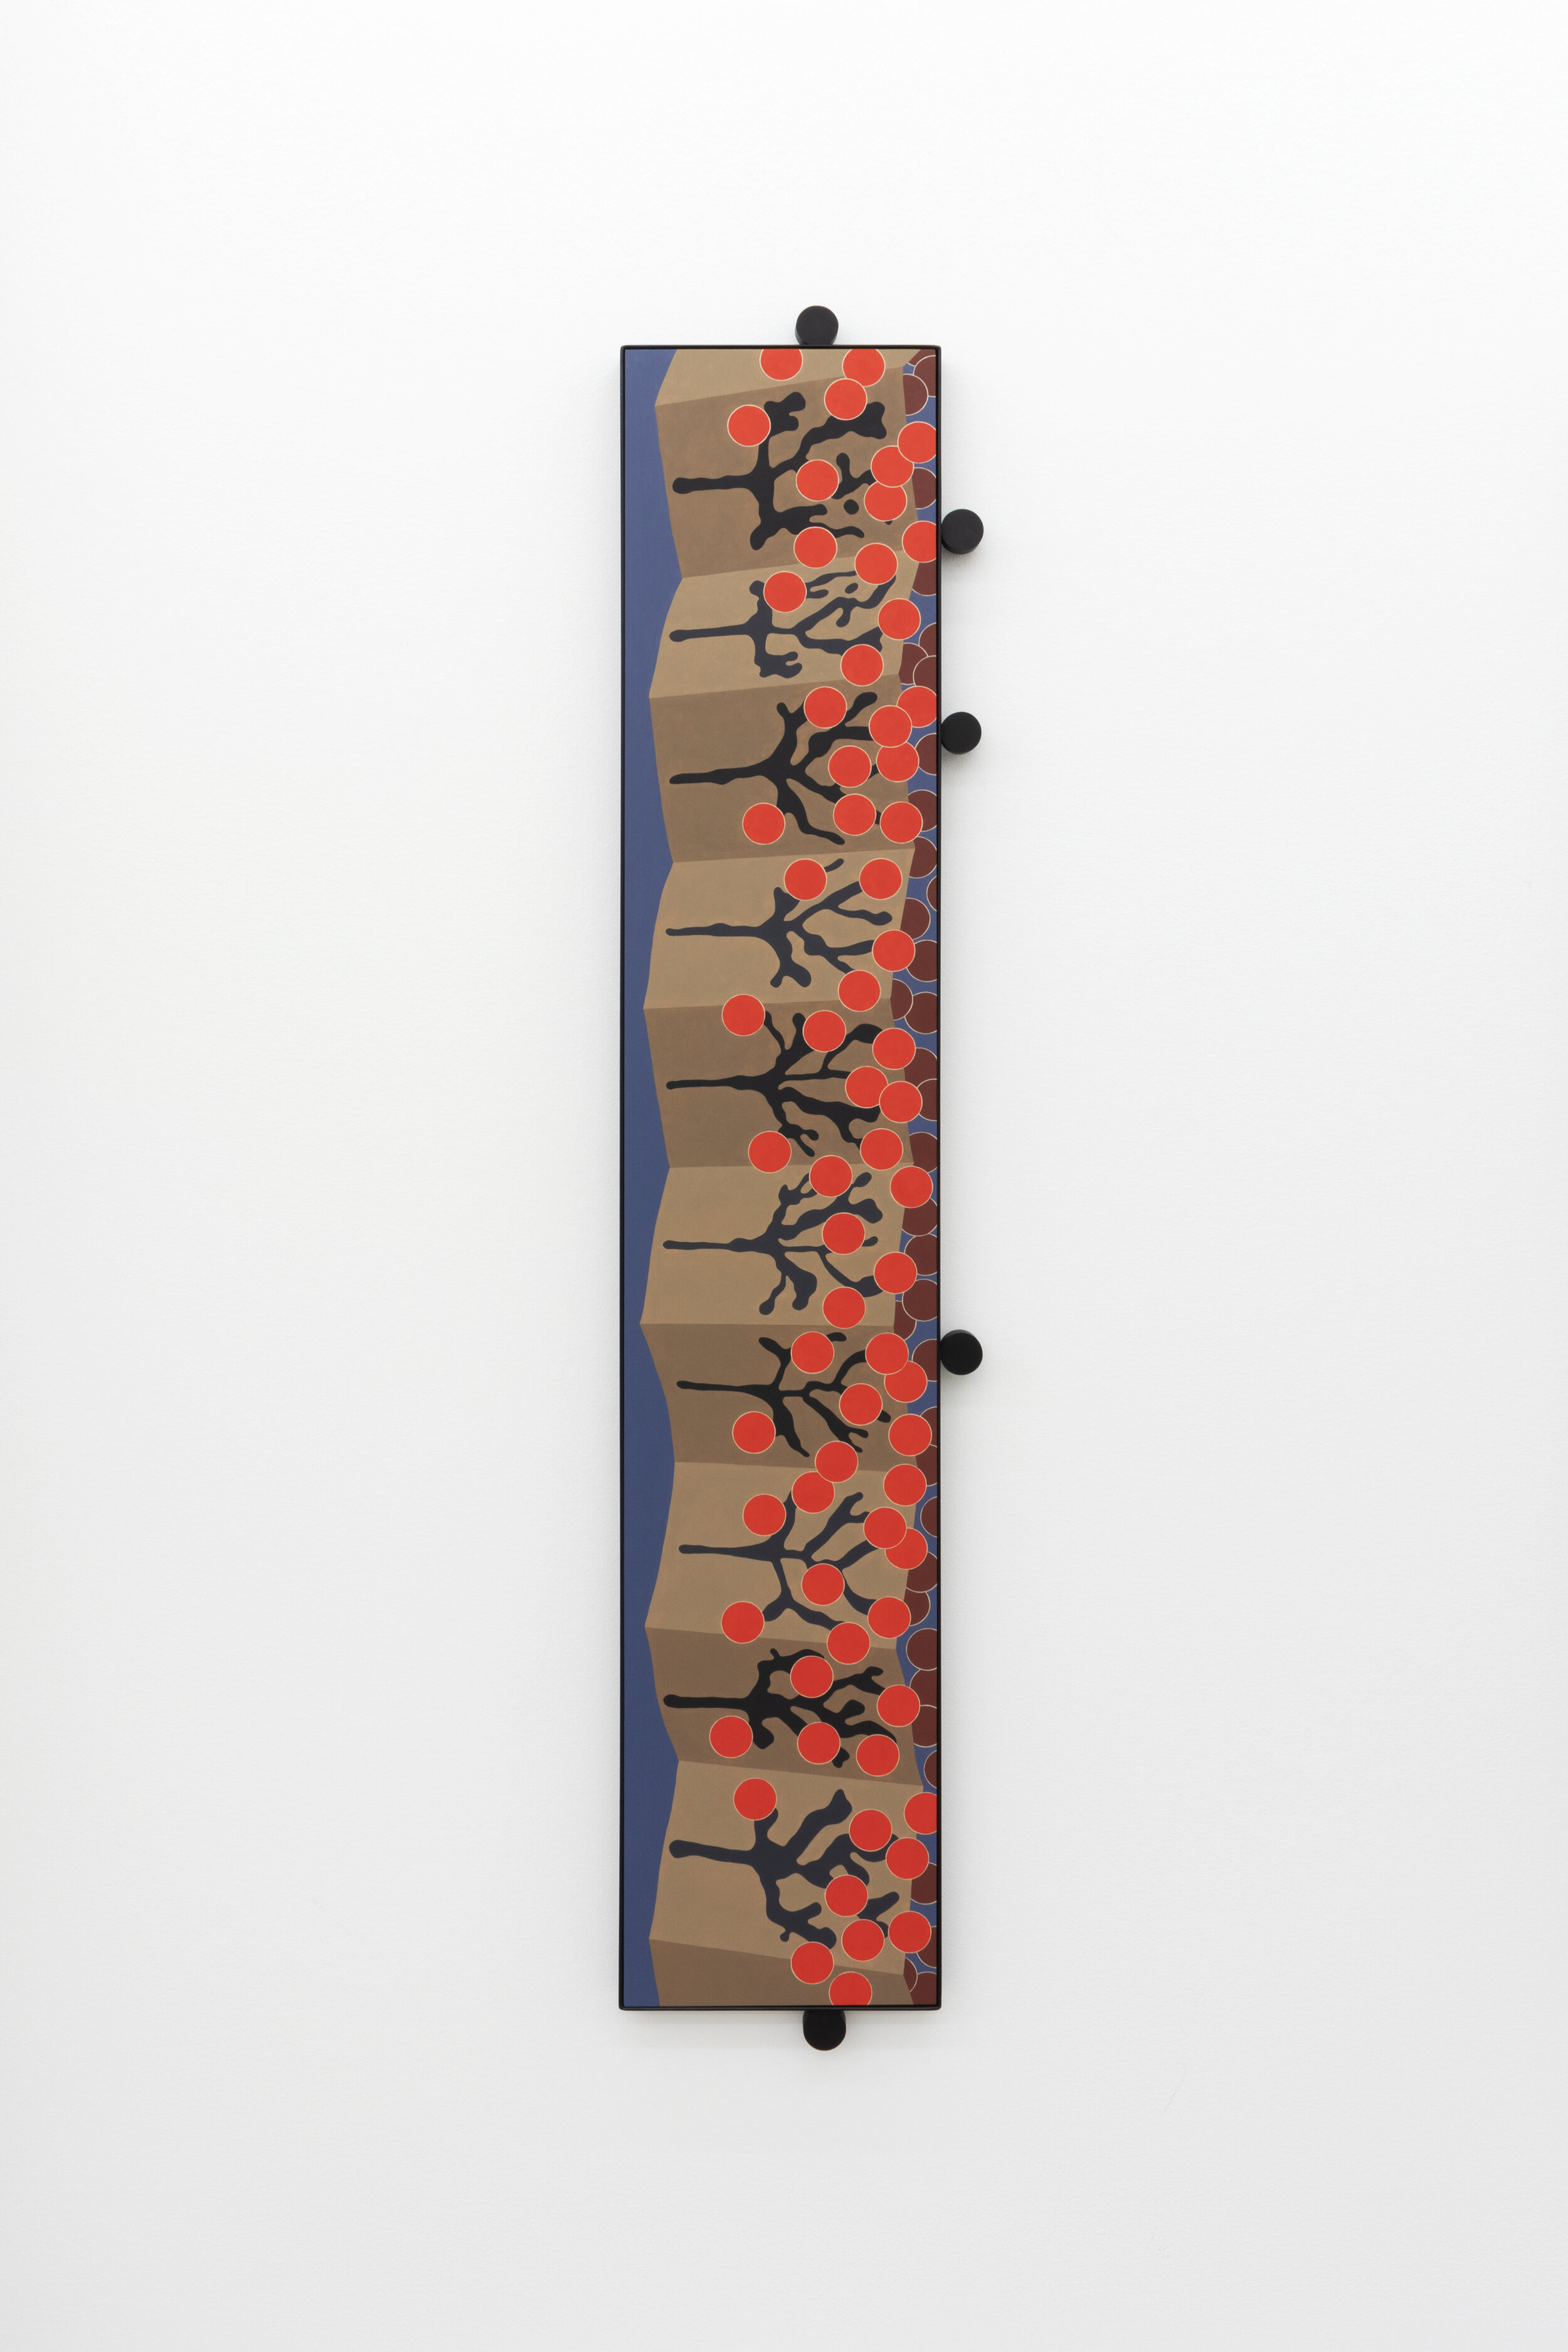  Vanessa Maltese    Hypothesizing coincidence no. 1 , 2020   Oil on panel, powder coated steel, wood, magnets   60.25 x 11.25 in  